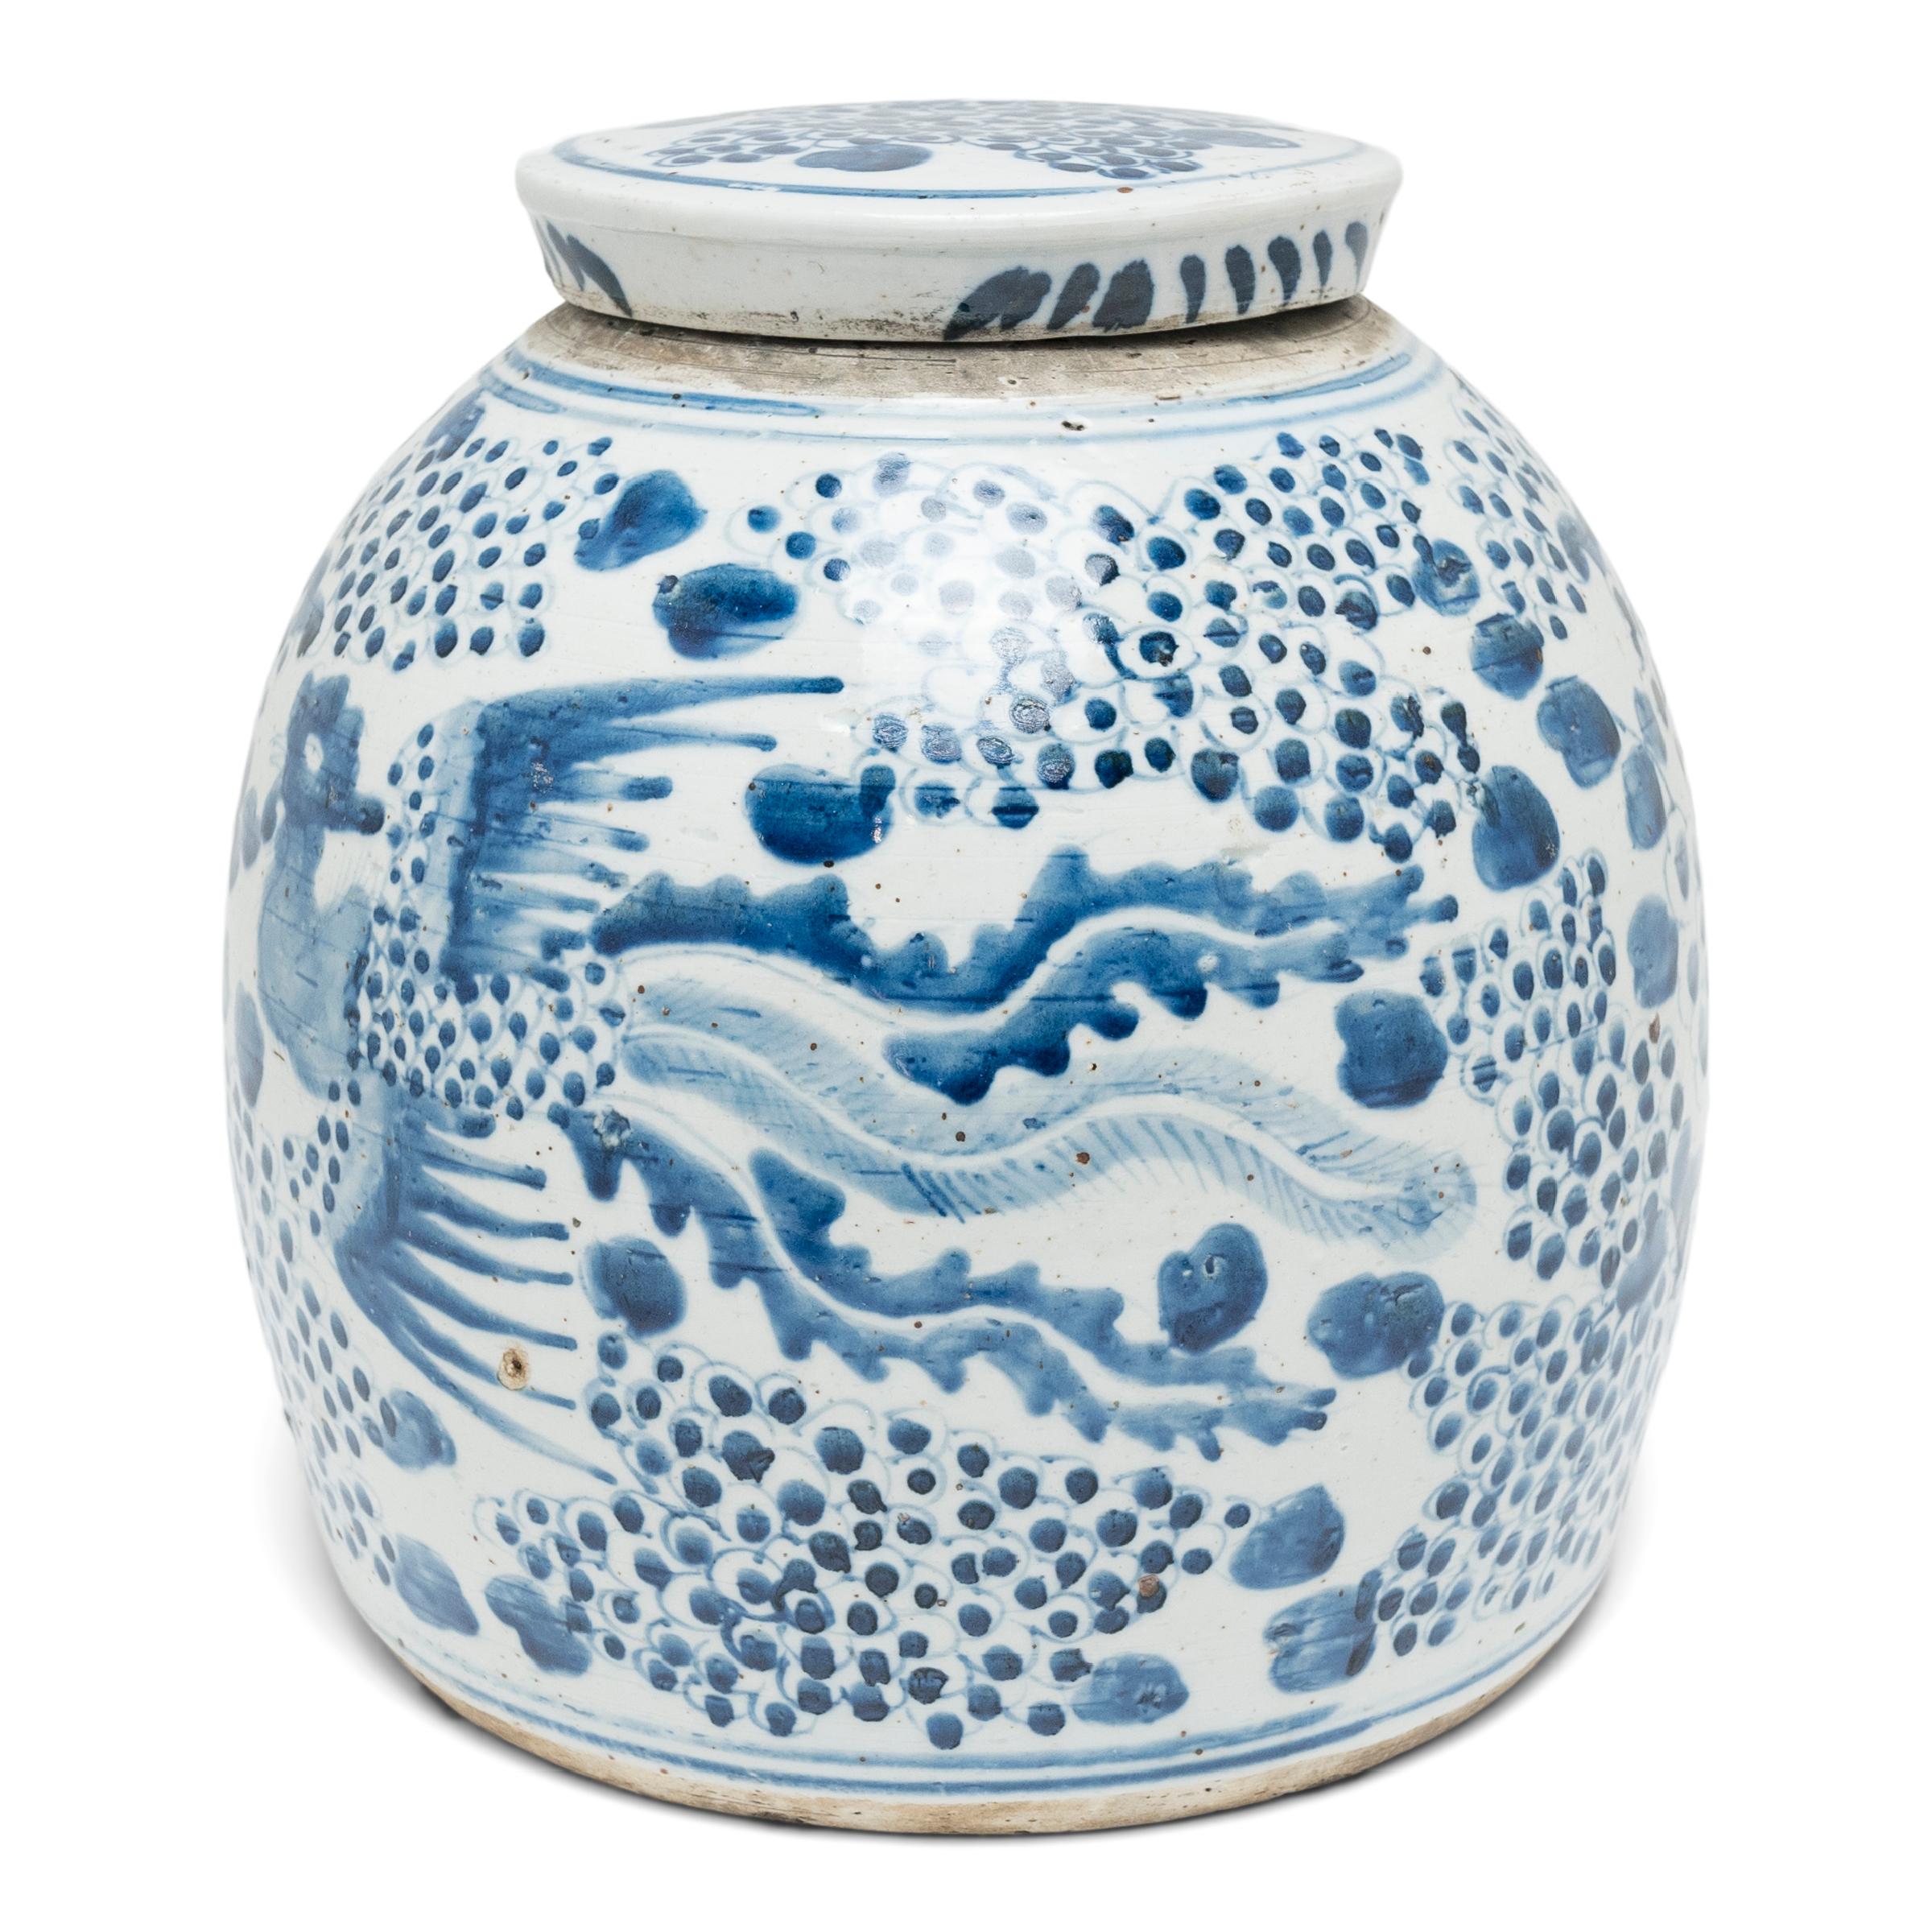 Brushed with dark cobalt blue atop a creamy white field, this Qing-dynasty tea leaf jar beautifully exemplifies the timeless allure of blue-and-white porcelain. The tea jar has a gently tapered form with a wide base and high shoulders that flow into